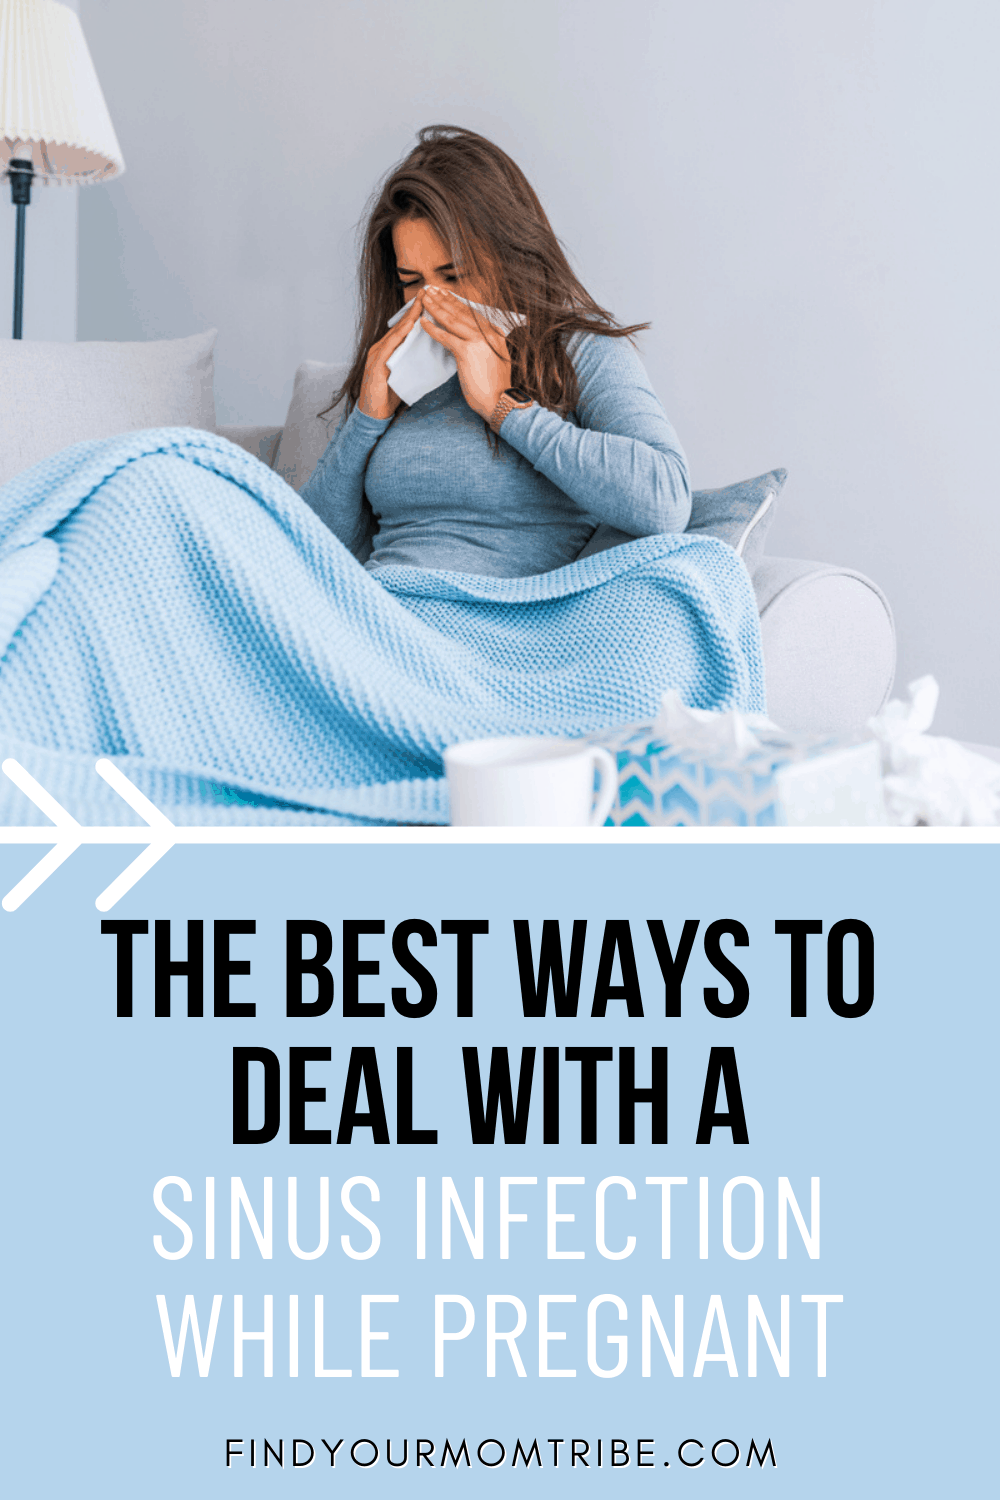 The Best Ways To Deal With A Sinus Infection While Pregnant